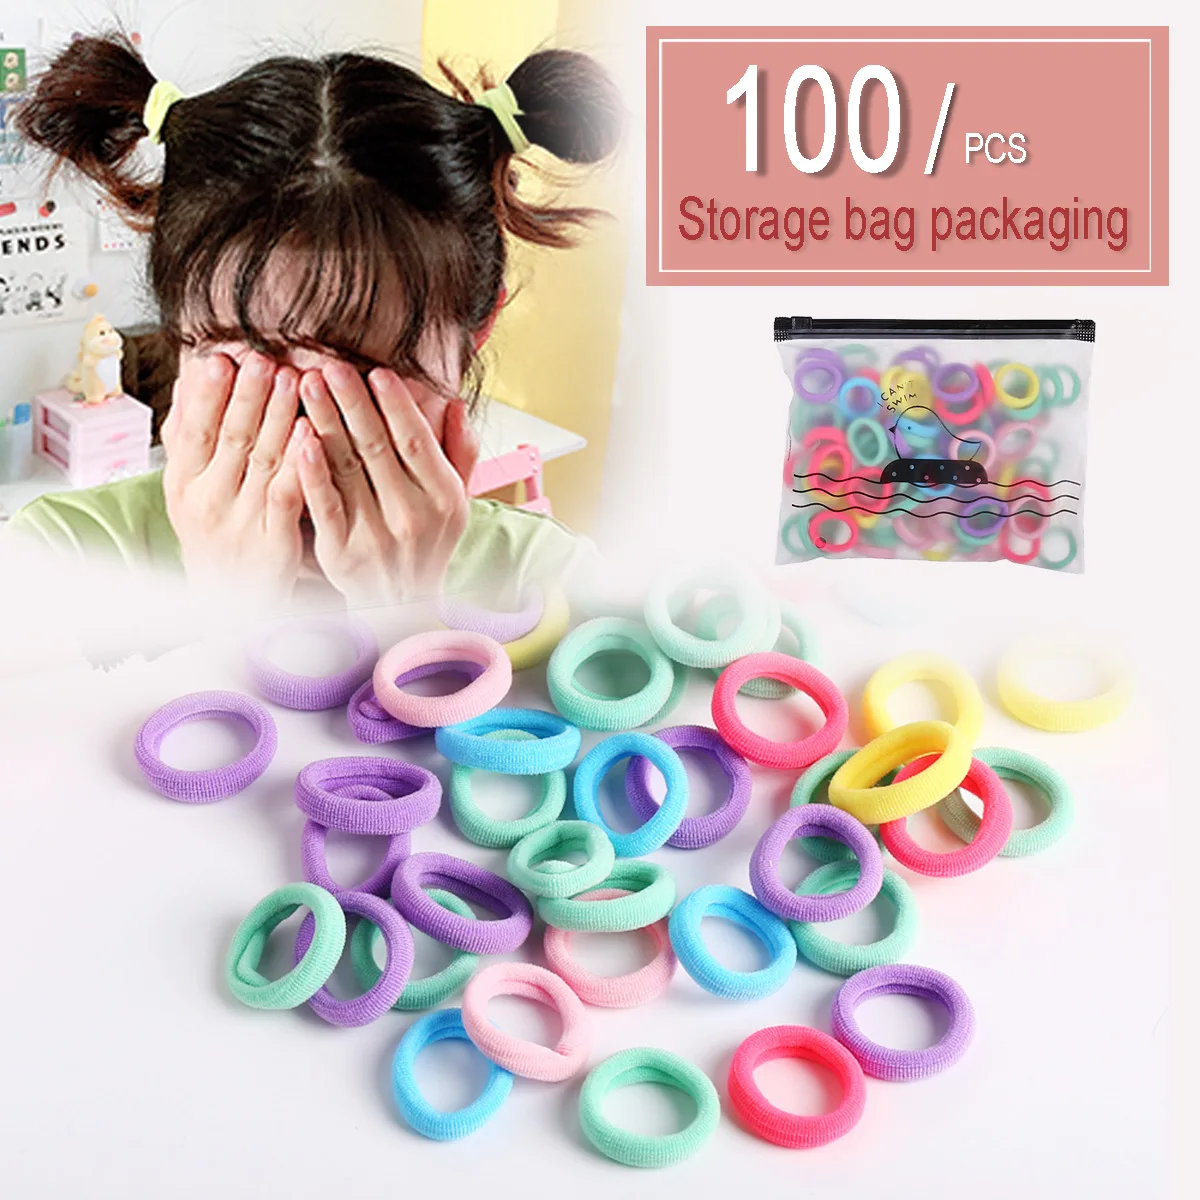 100pcs Baby Colorful Small Elastic Hair Bands Kids Ponytail Holder Tie I6Q5 